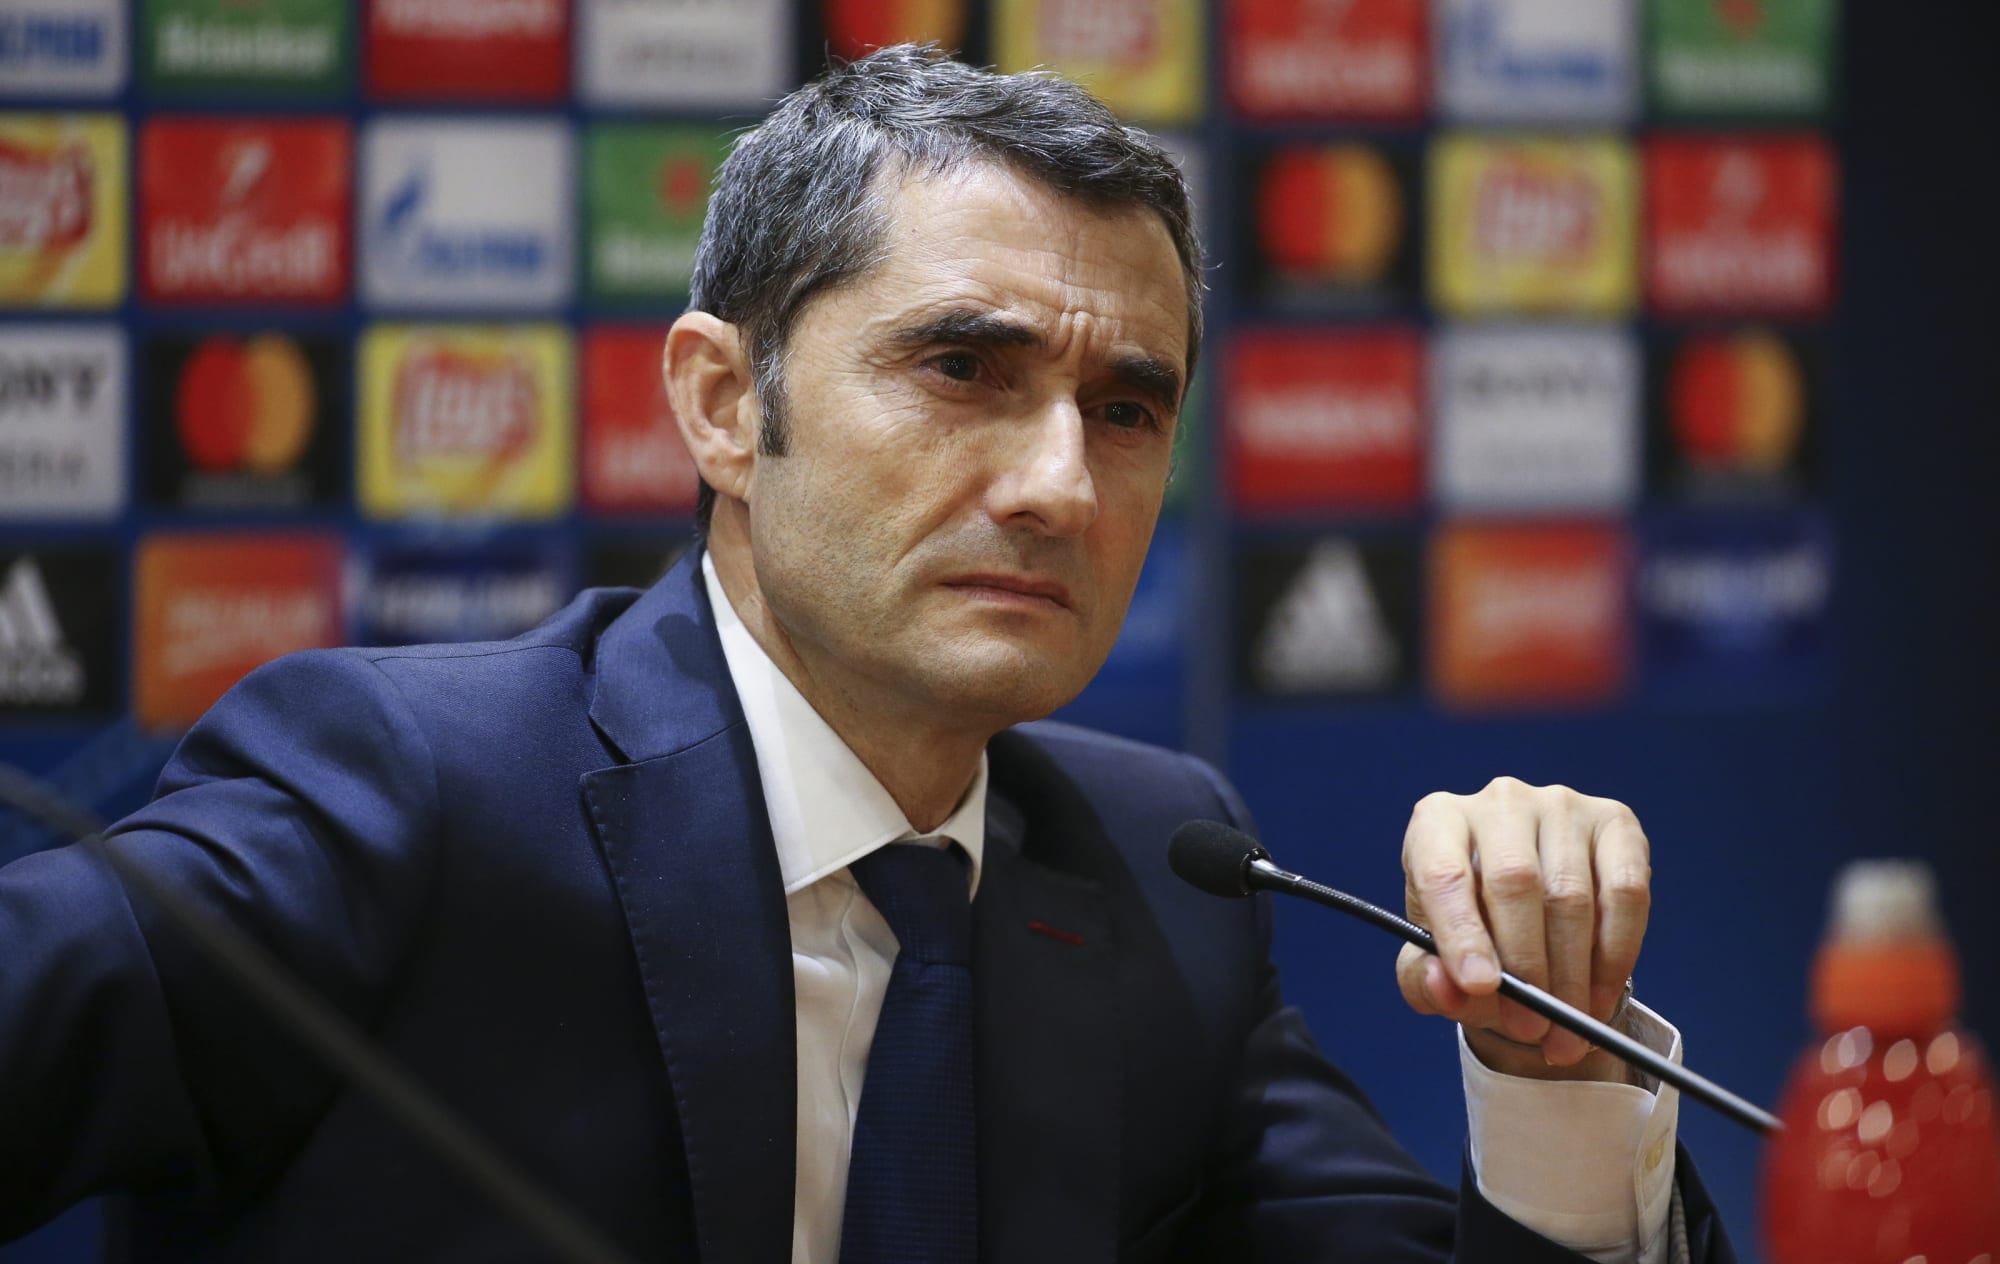 Ernesto Valverde takes questions about UCL collapse